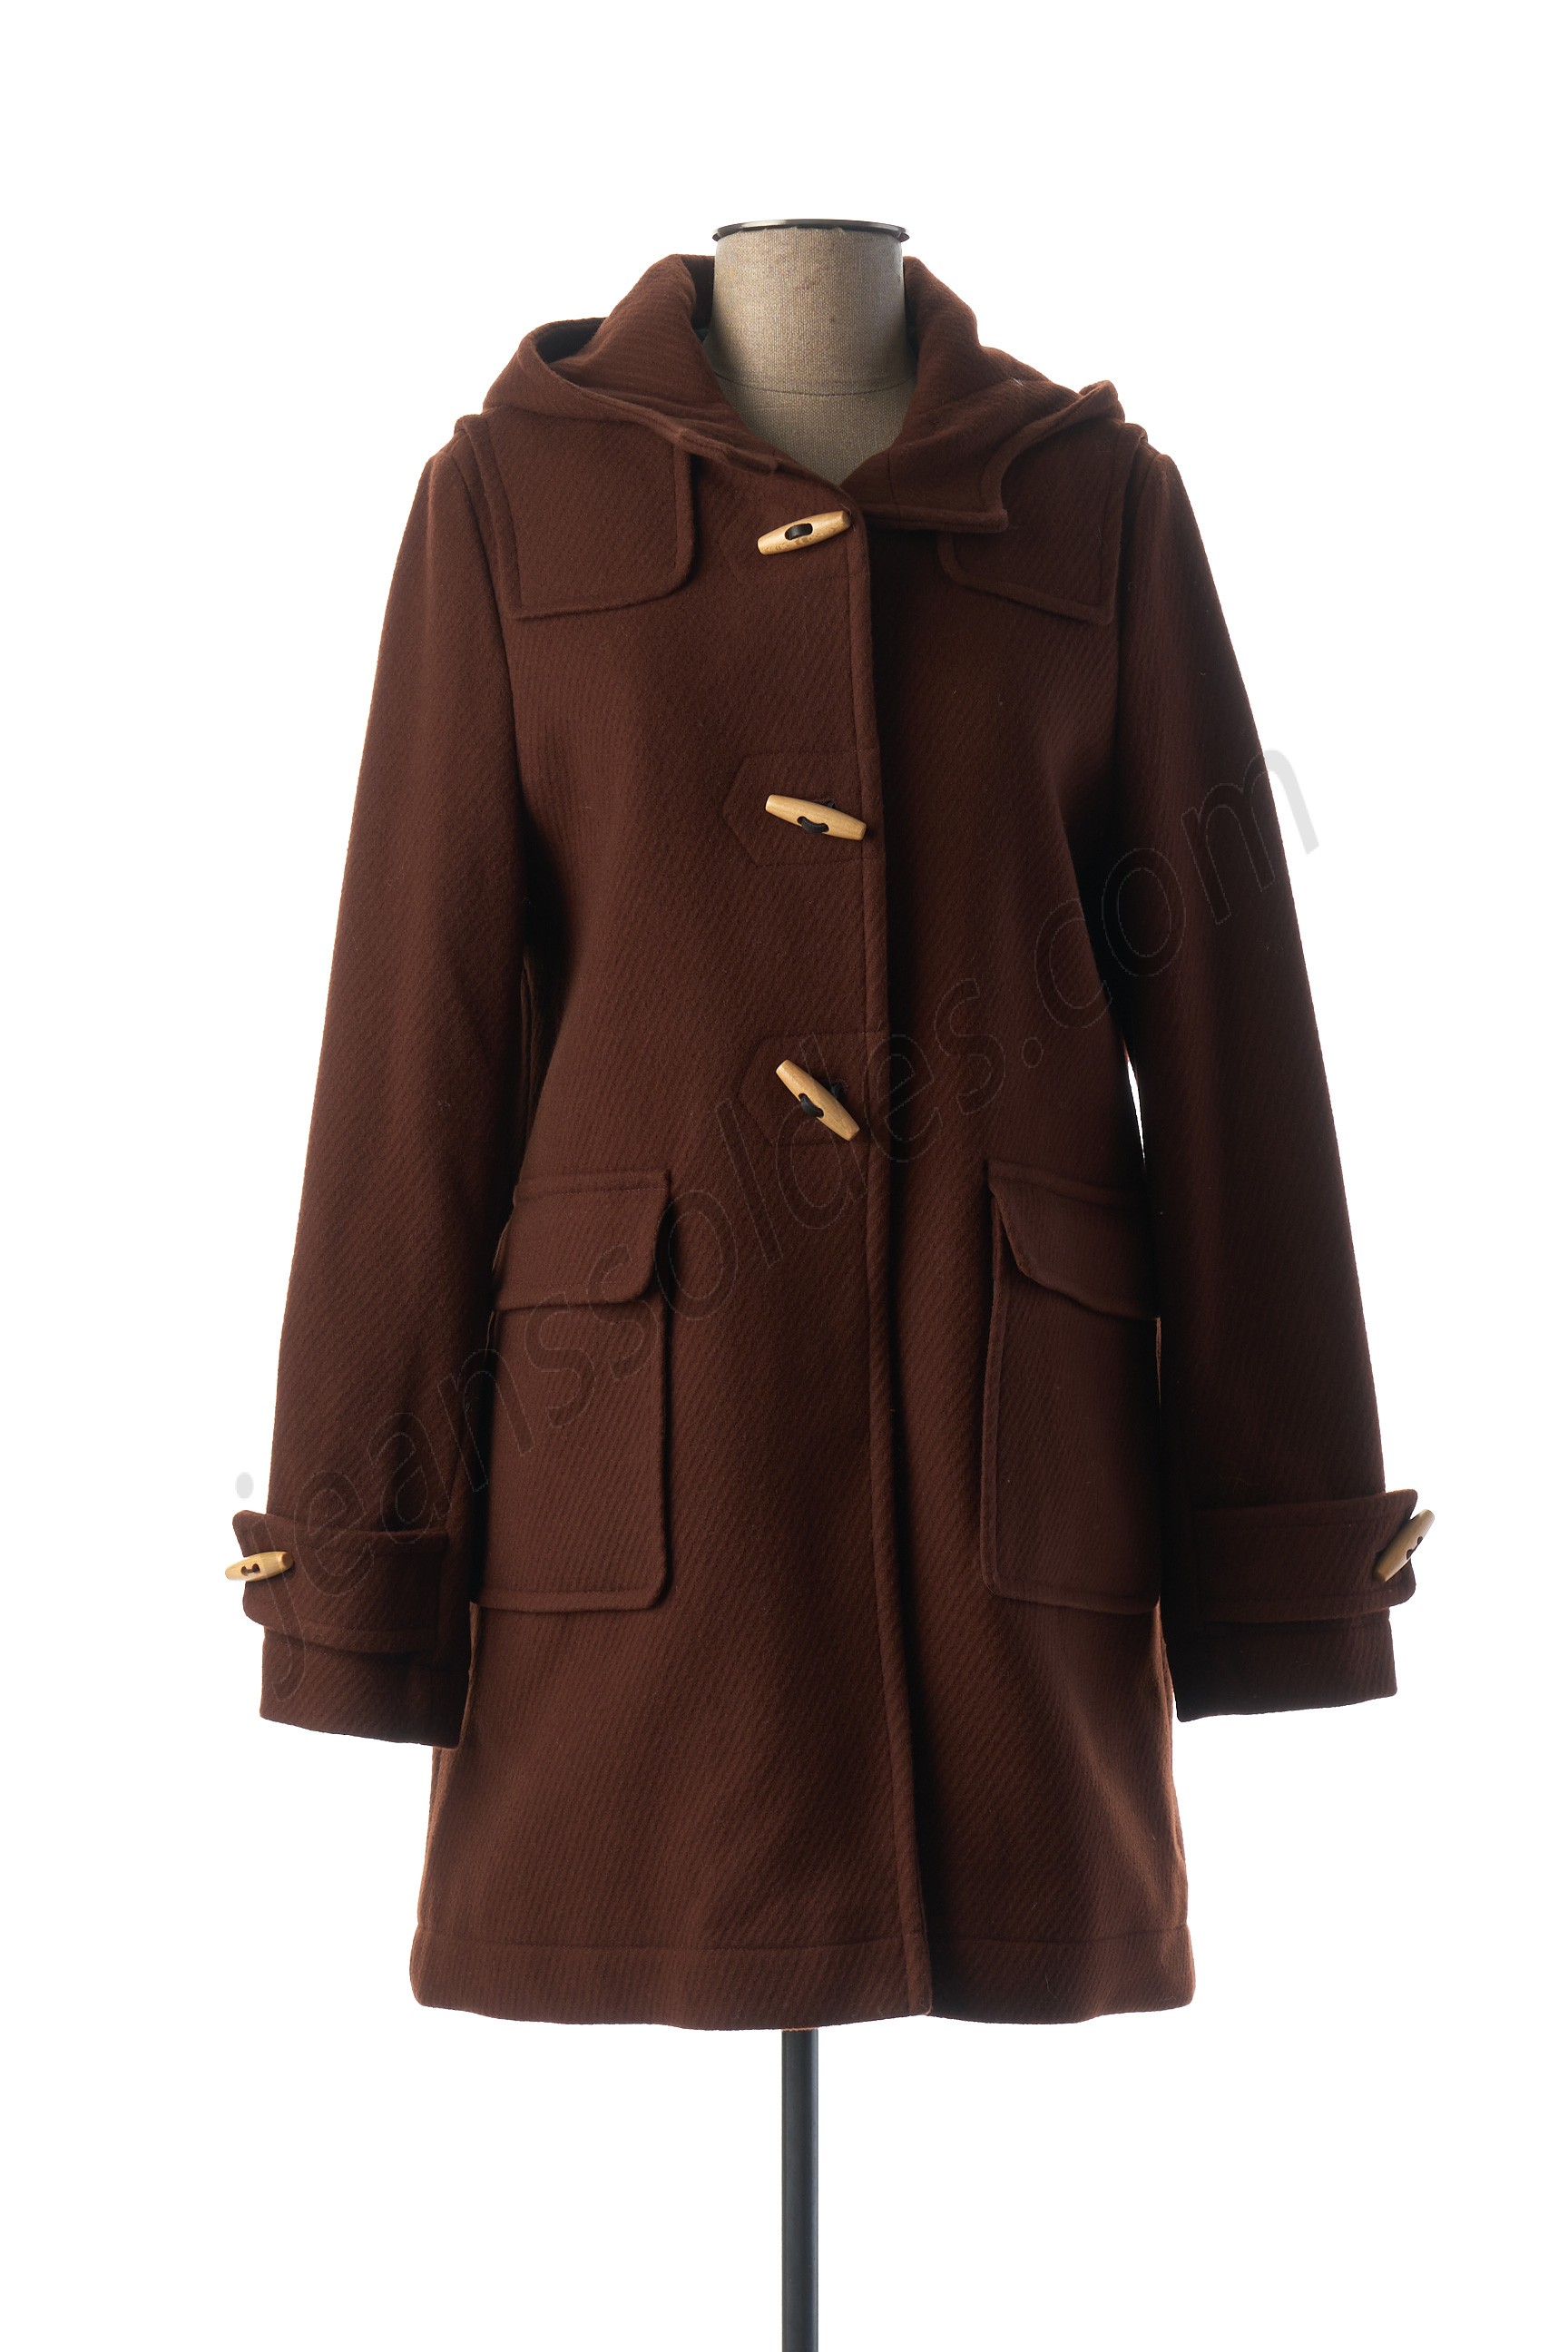 trench & coat-Manteau long déstockage - trench & coat-Manteau long déstockage